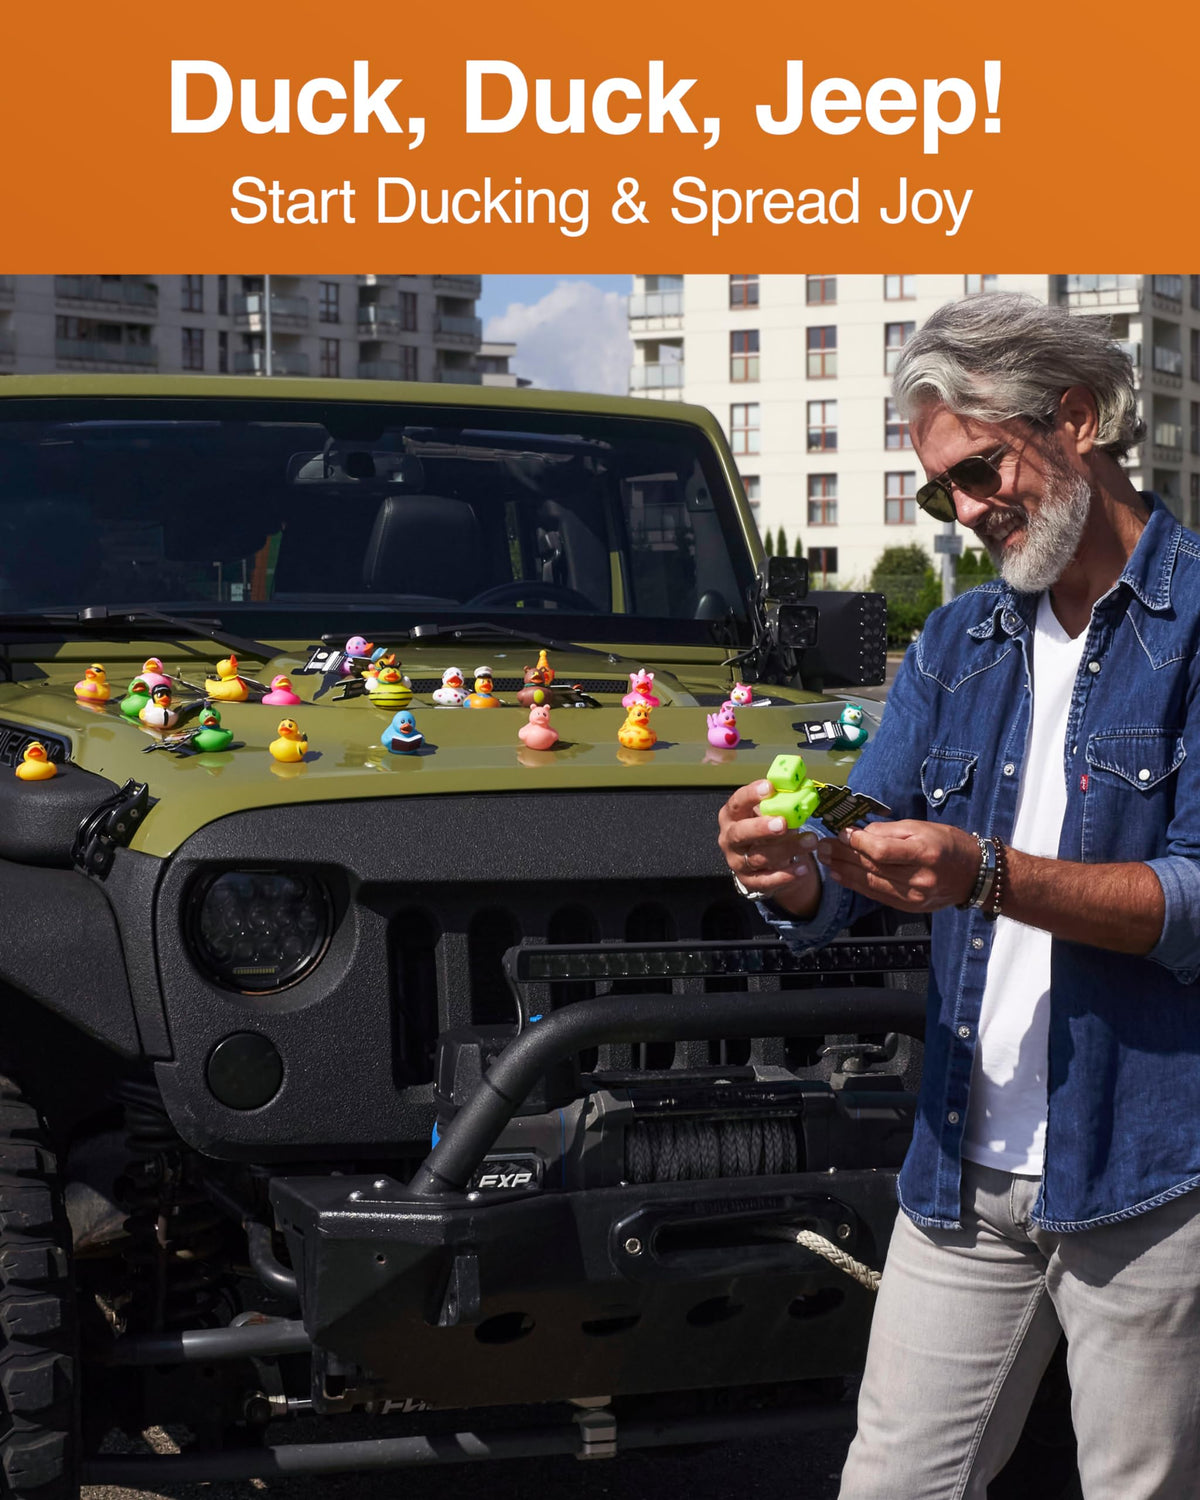 Rubber Ducks Jeep Ducking - 76 piece kit including Bag